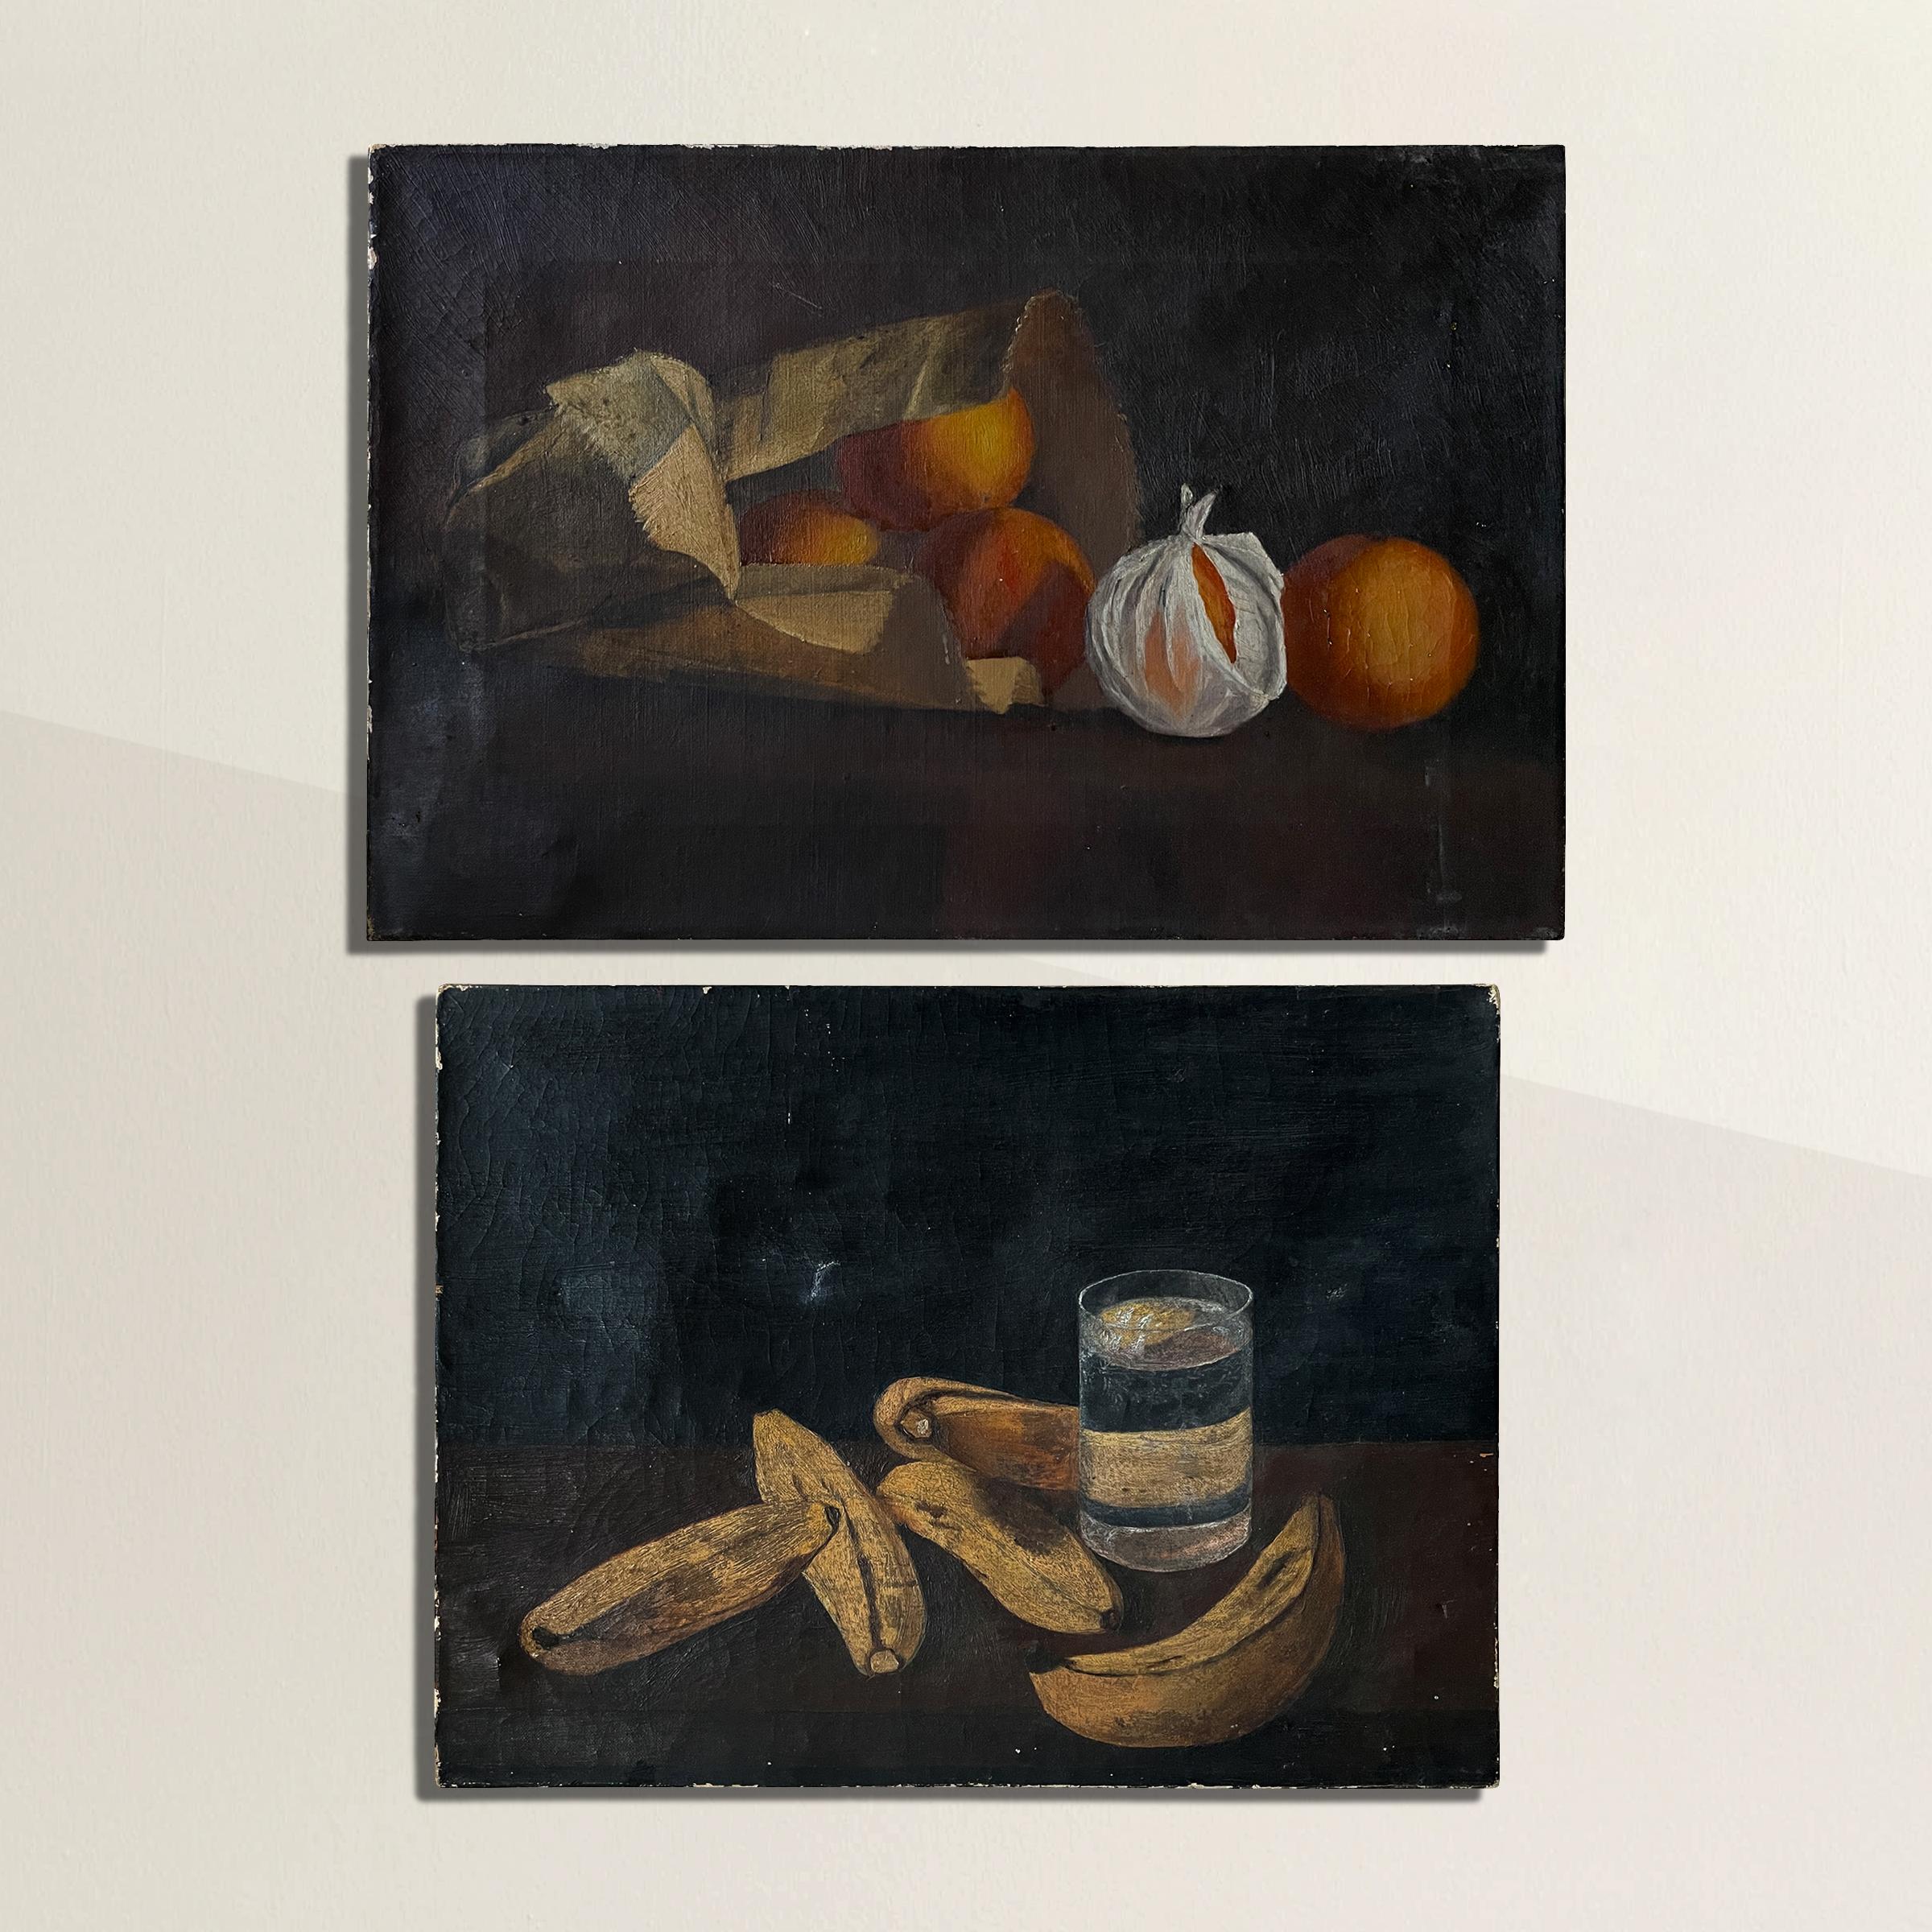 A wonderfully charming set of two 19th century French academic oil-on-canvas sill life paintings, one depicting oranges in brown paper bag, and the other depicting a bunch of bananas with a glass of water. The banana painting is initialed and dated